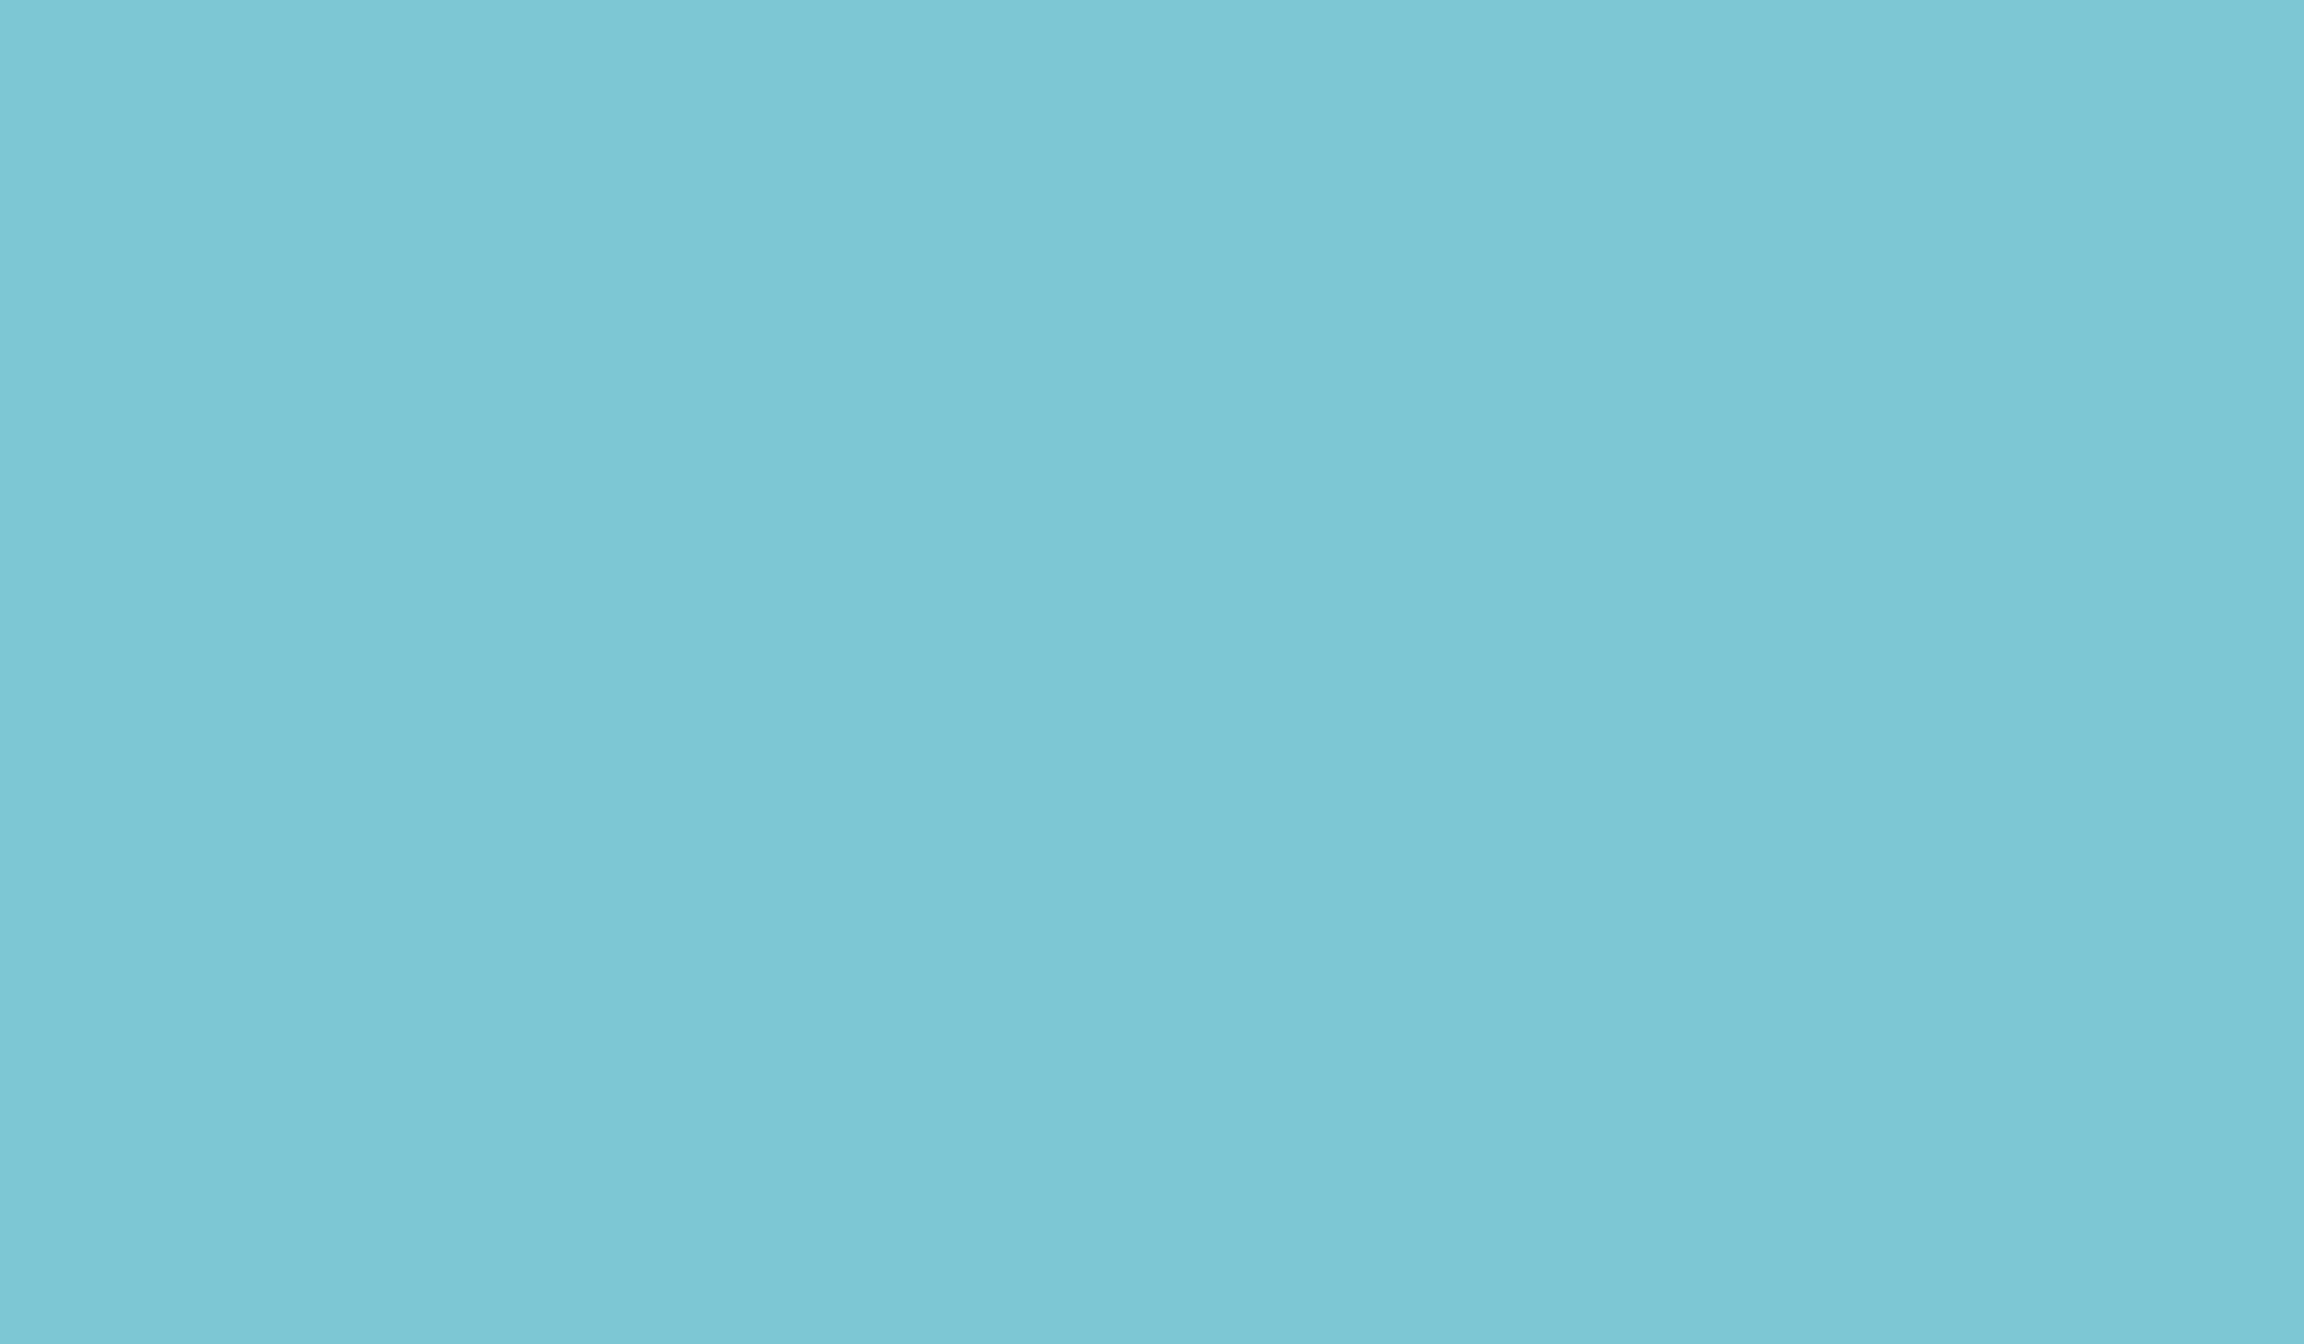 r426-new-site-teal.png